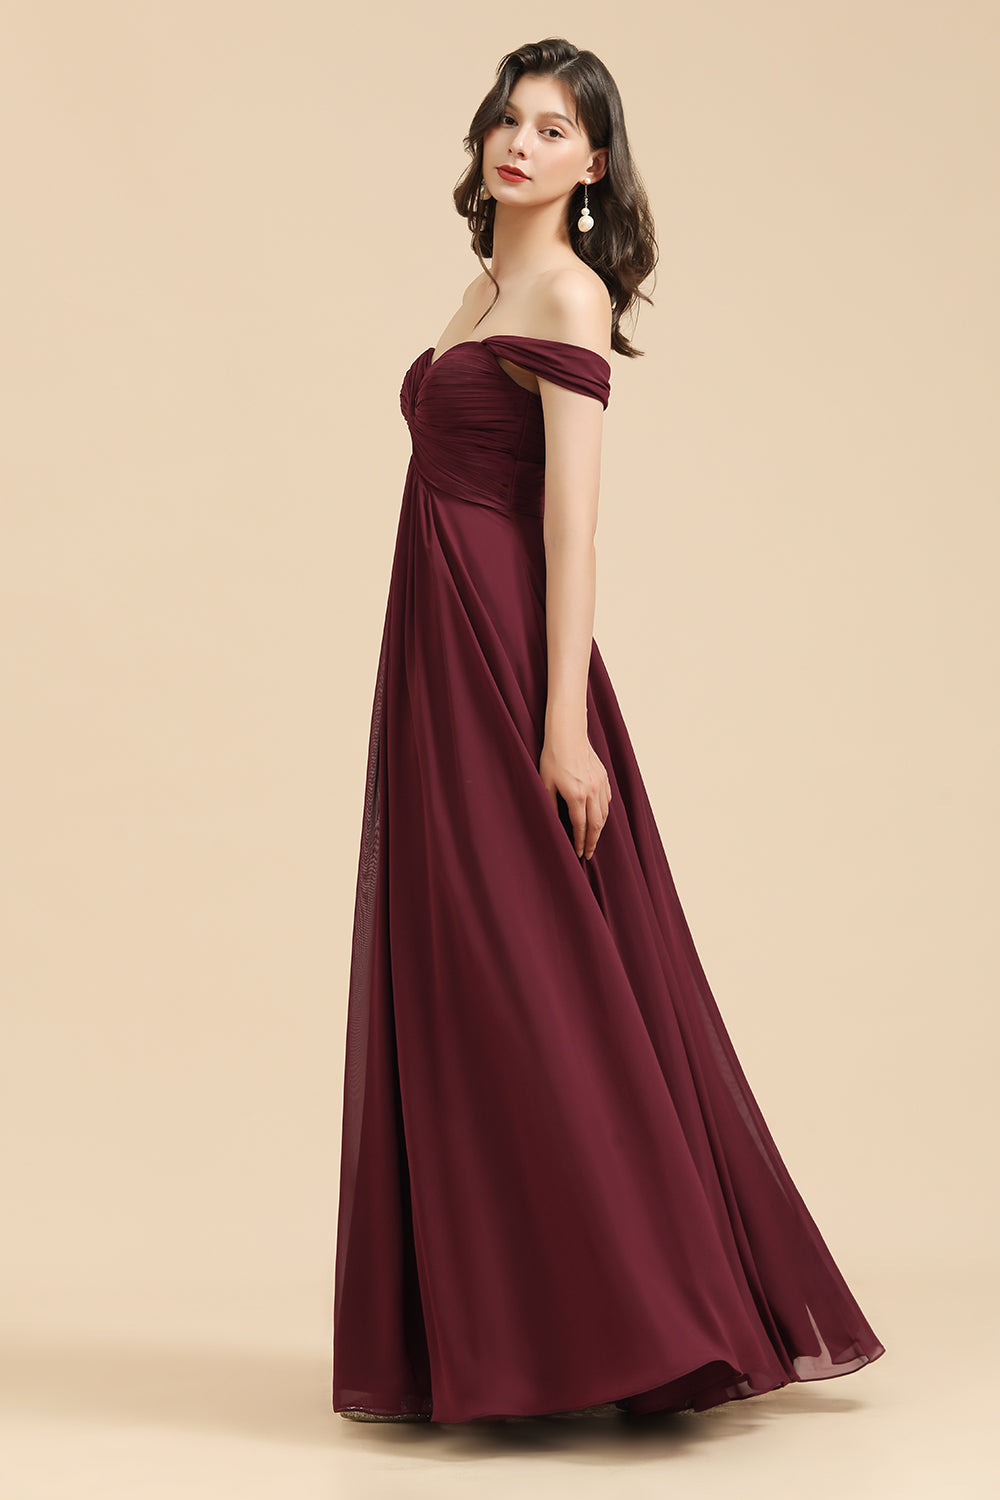 Load image into Gallery viewer, New Arrival A-line Off-the-shoulder Sweetheart Burgundy Long Bridesmaid Dress-27dress
